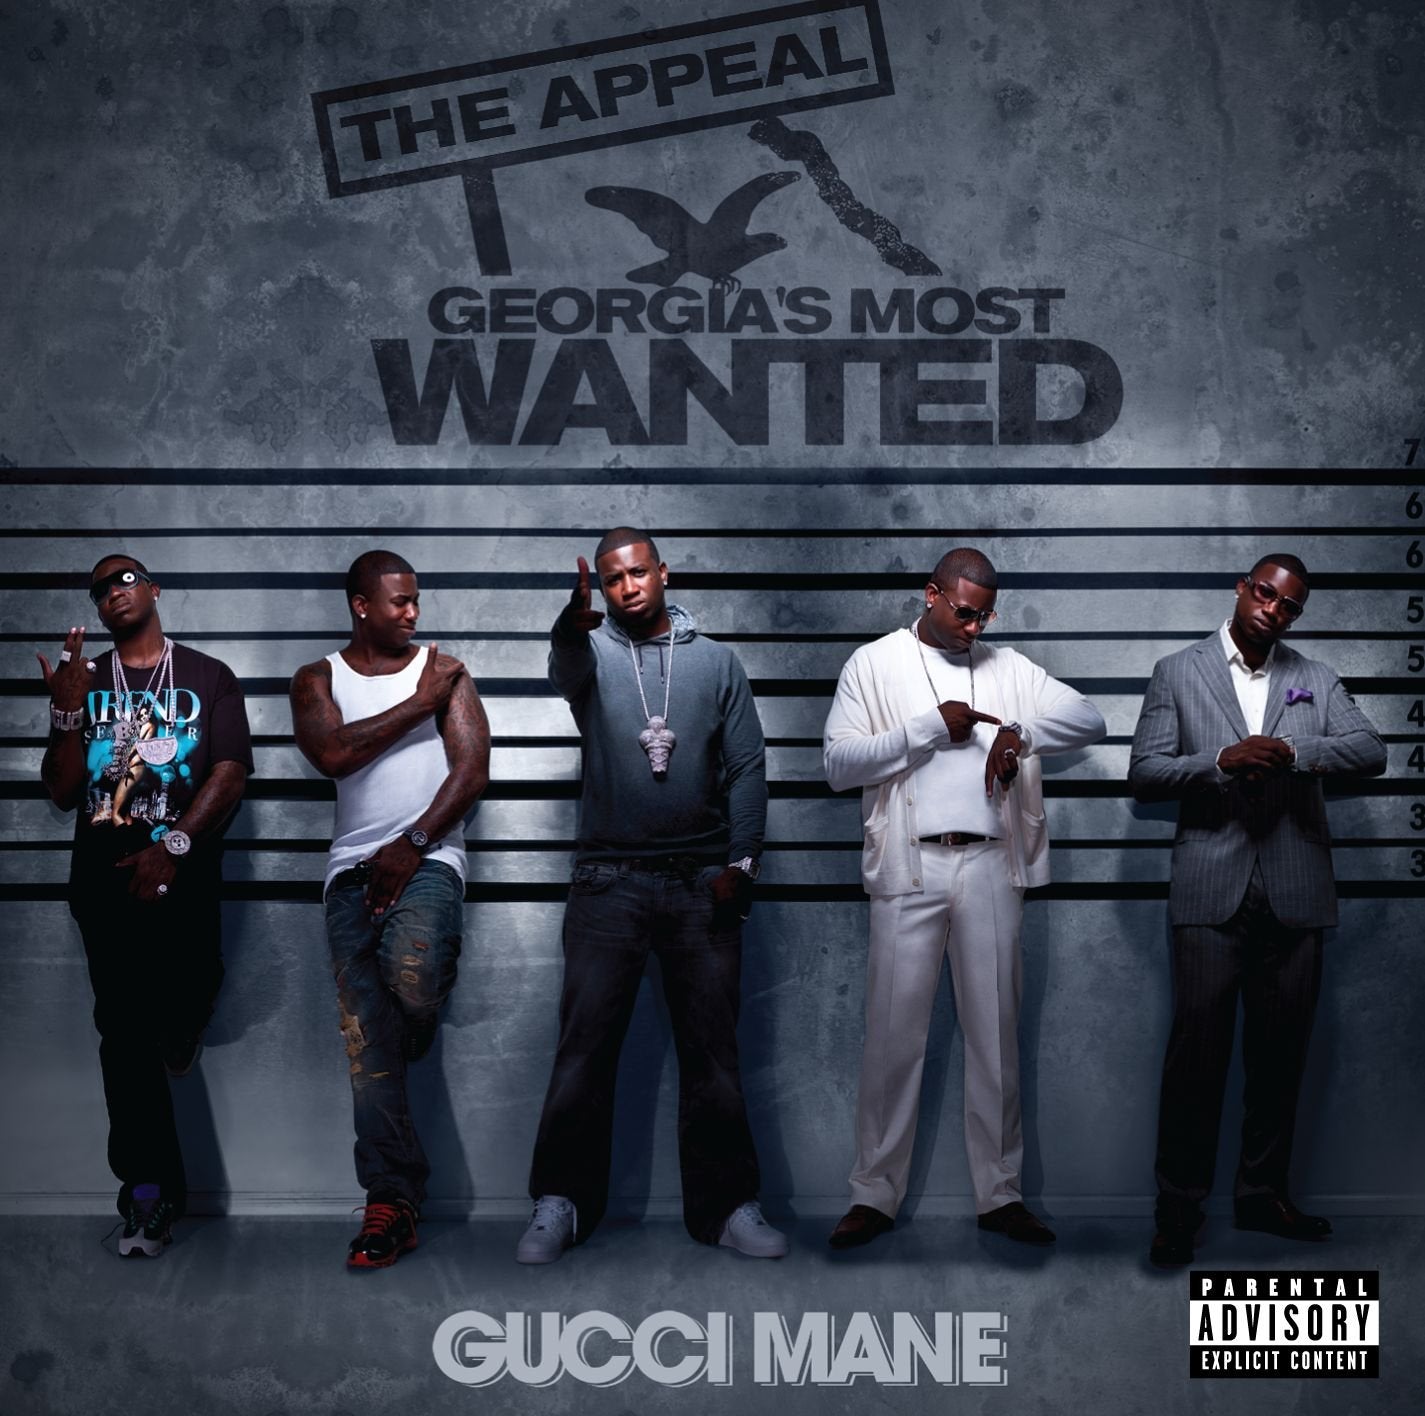 Gucci Mane- The Appeal: Georgia's Most Wanted - Darkside Records